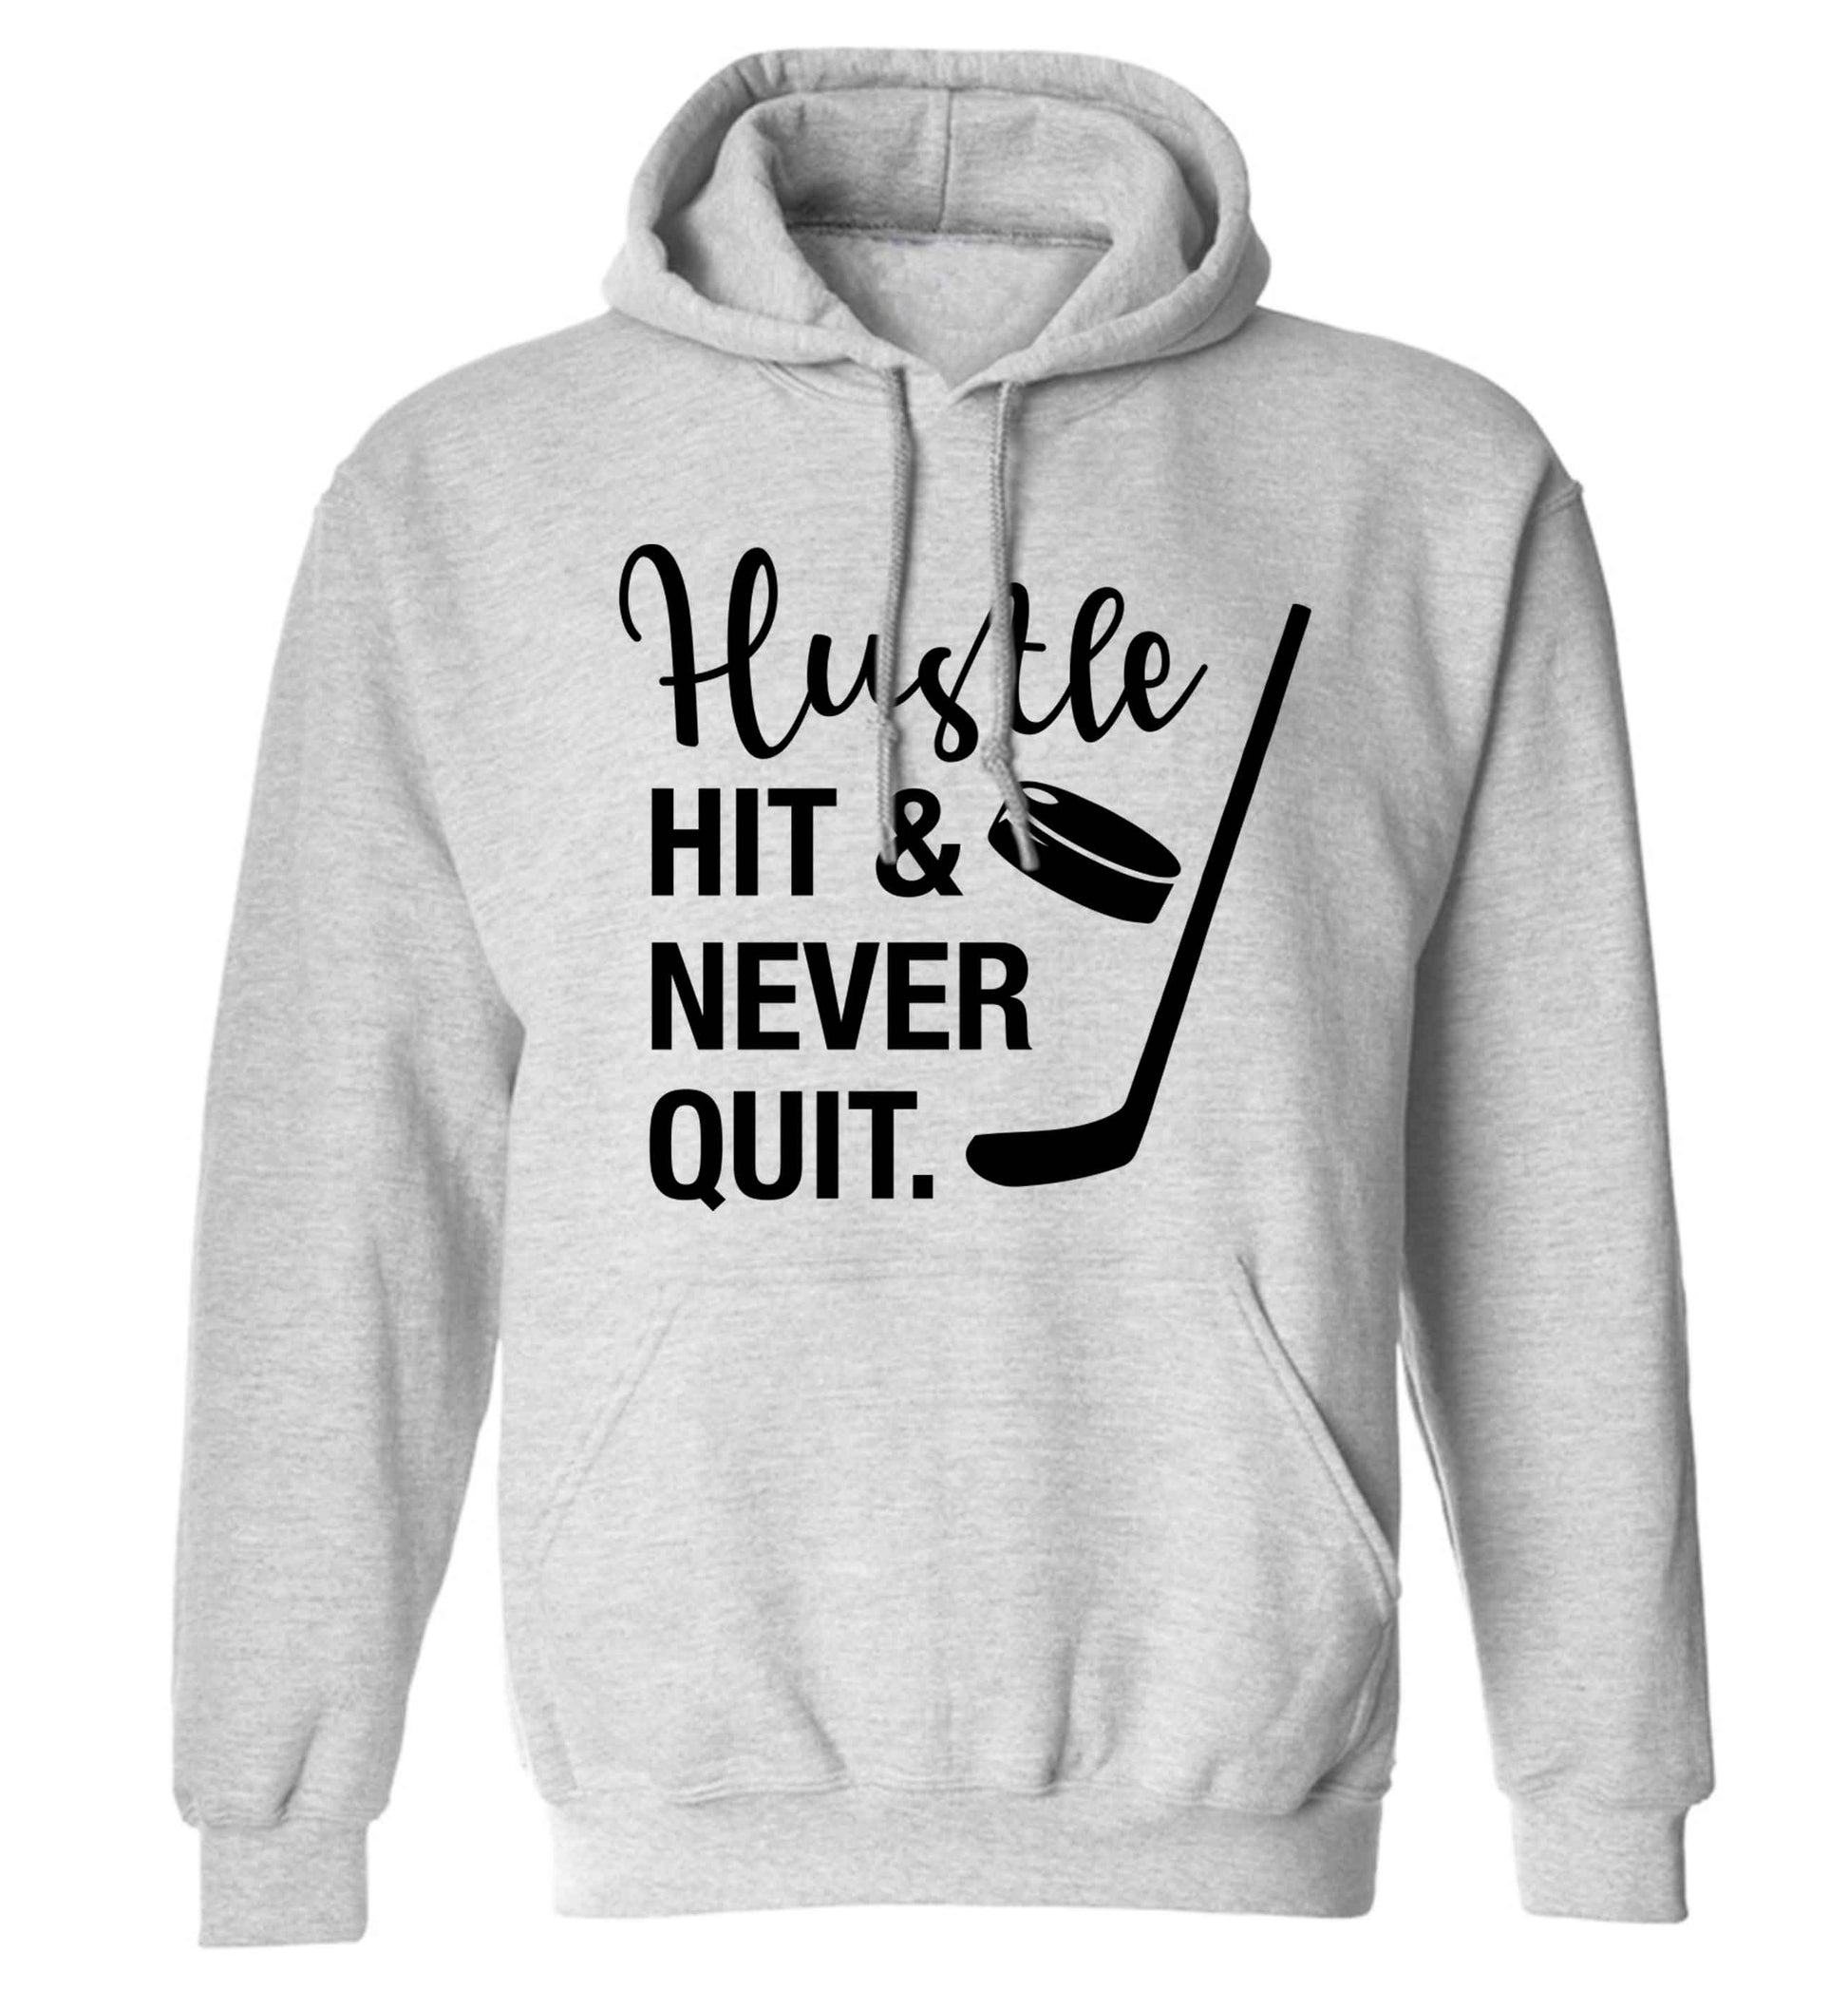 Hustle hit and never quit adults unisex grey hoodie 2XL